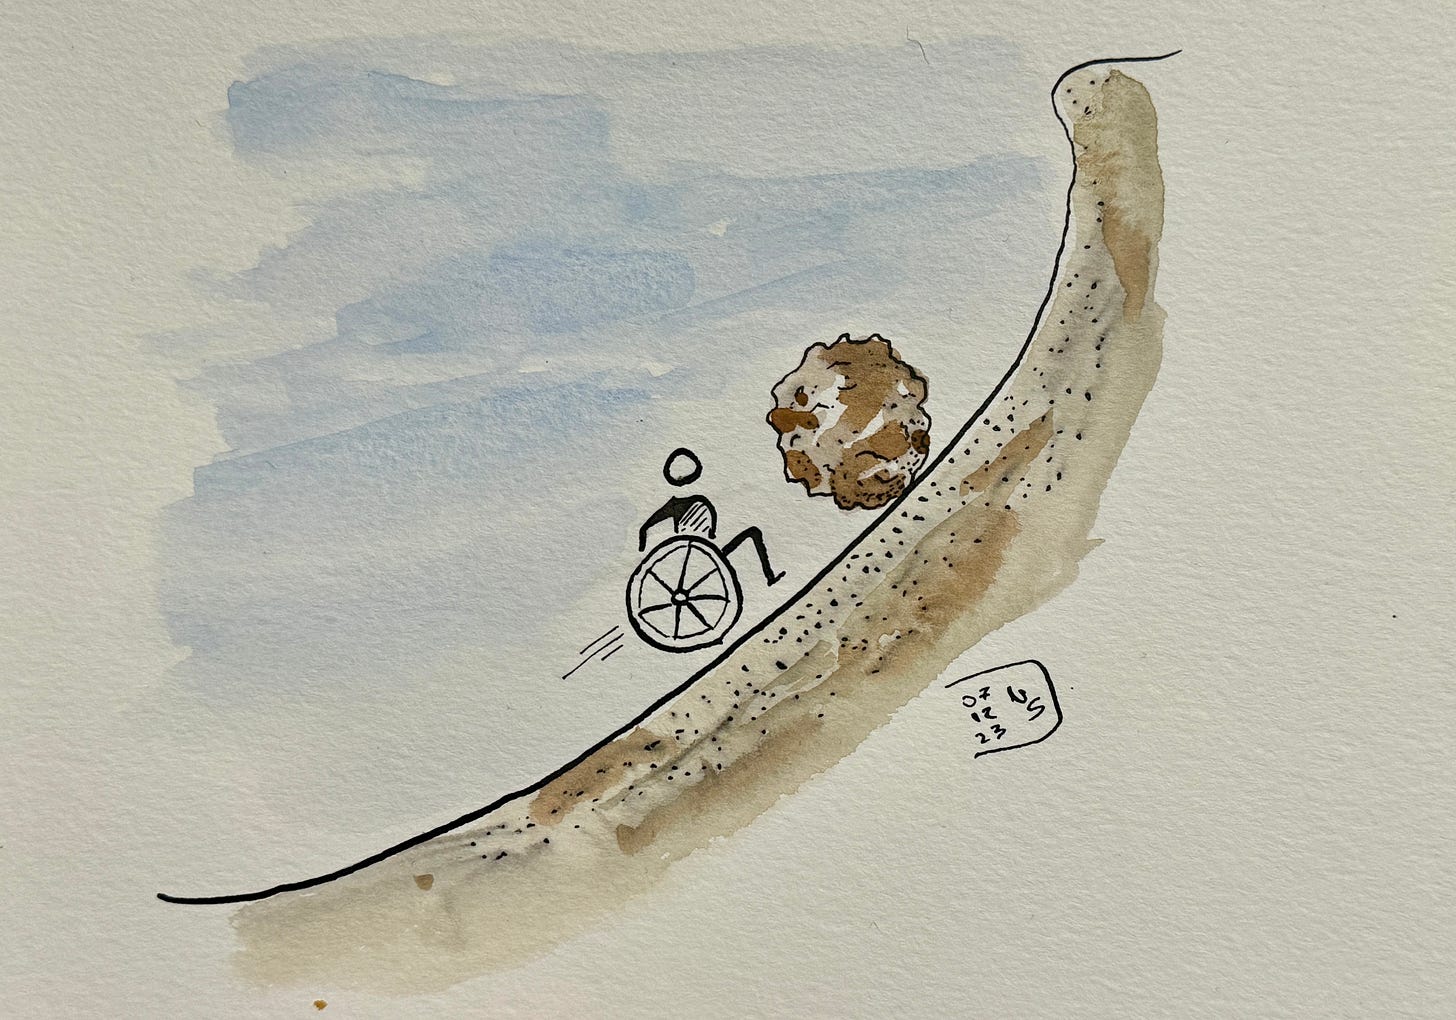 India ink and watercolor sketch of a stylized person in a wheelchair pushing a boulder larger than they are up a very steep slope with a lip at the top.